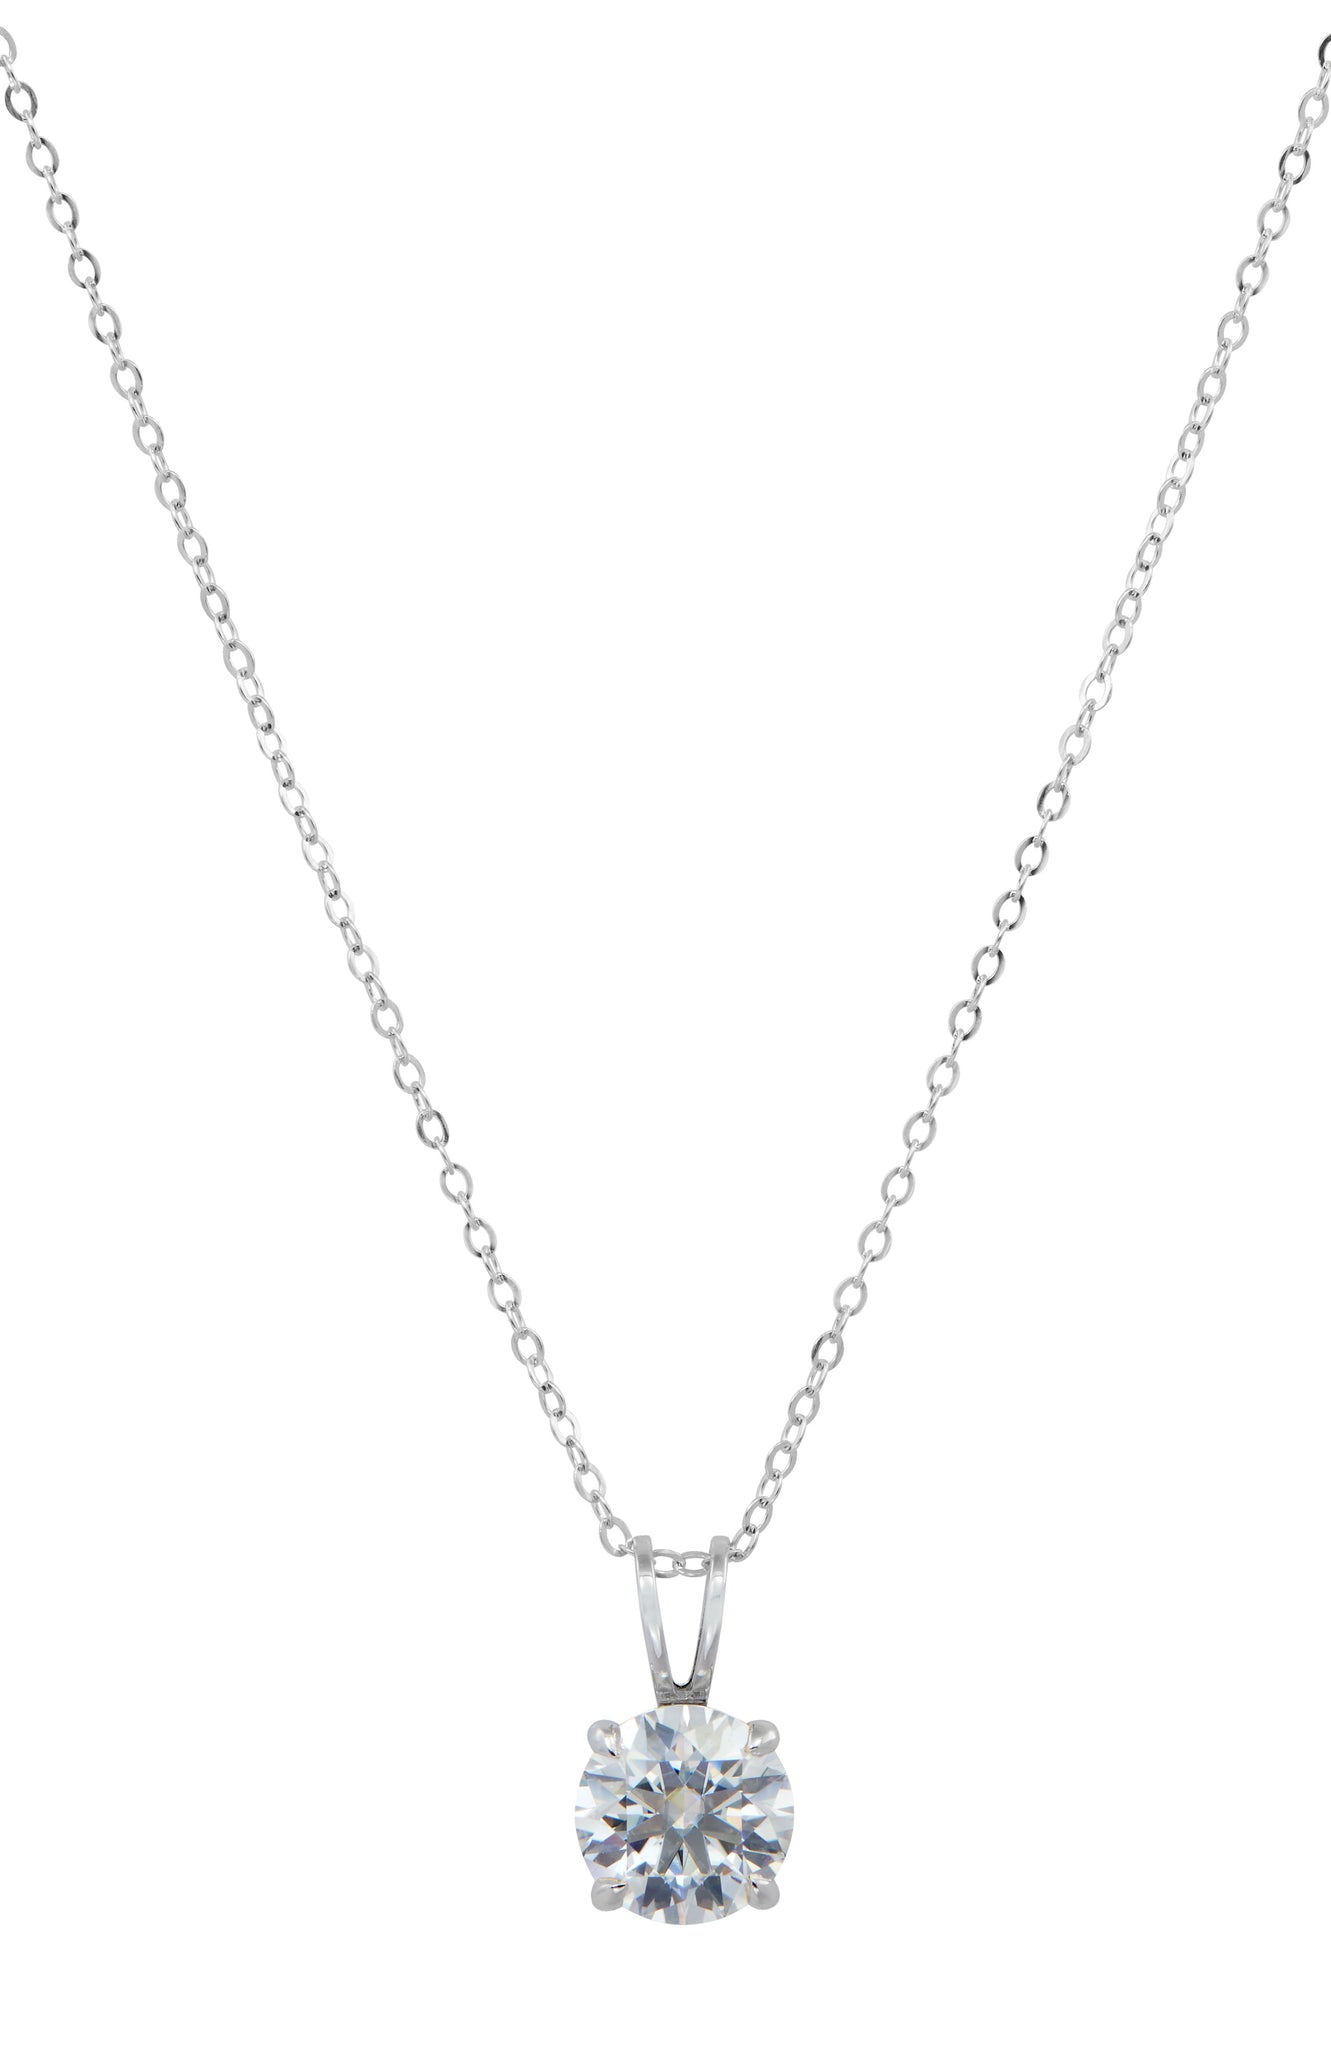 10K Solid White Gold 1 Carat TW Moissanite Solitaire Pendant with